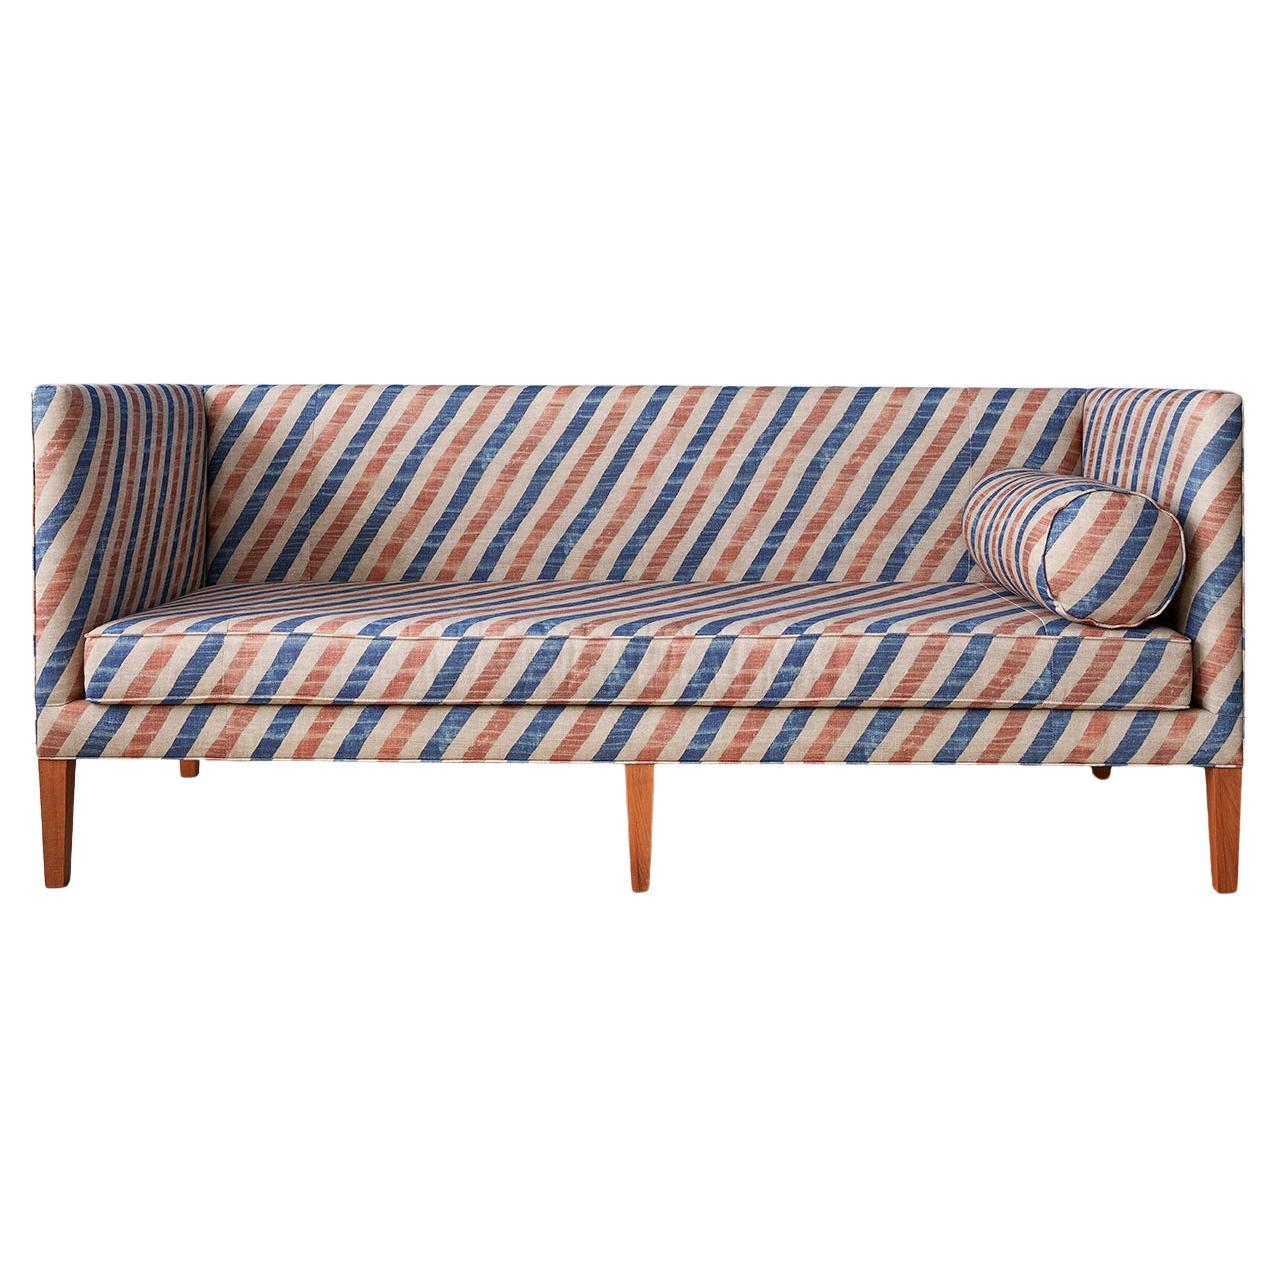 Contemporary Sofa in Customized Striped Upholstery by the Apartment, Belgium